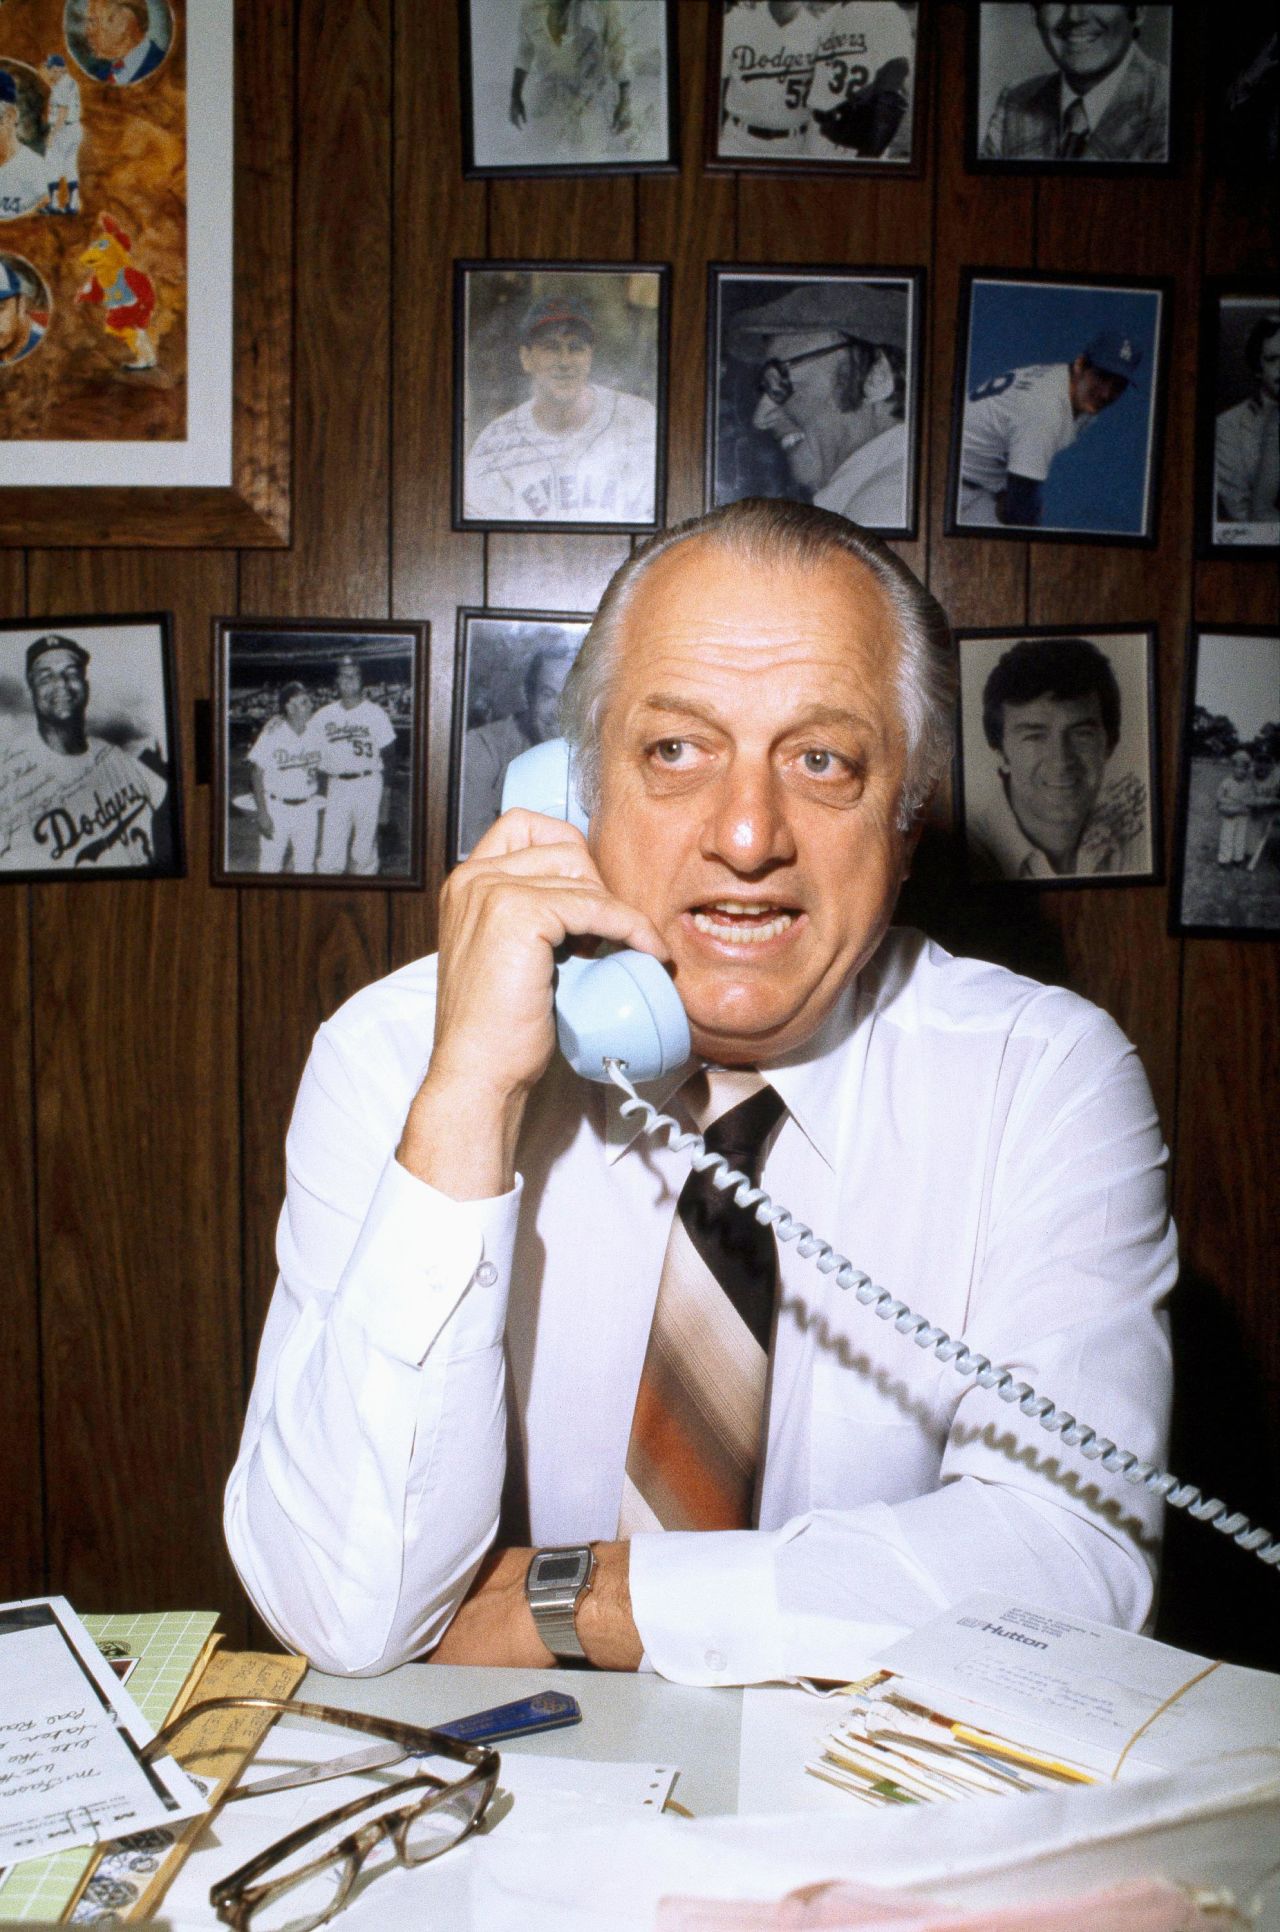 Lasorda talks on the phone in his office after he was named Manager of the Year by the Associated Press in November 1981.